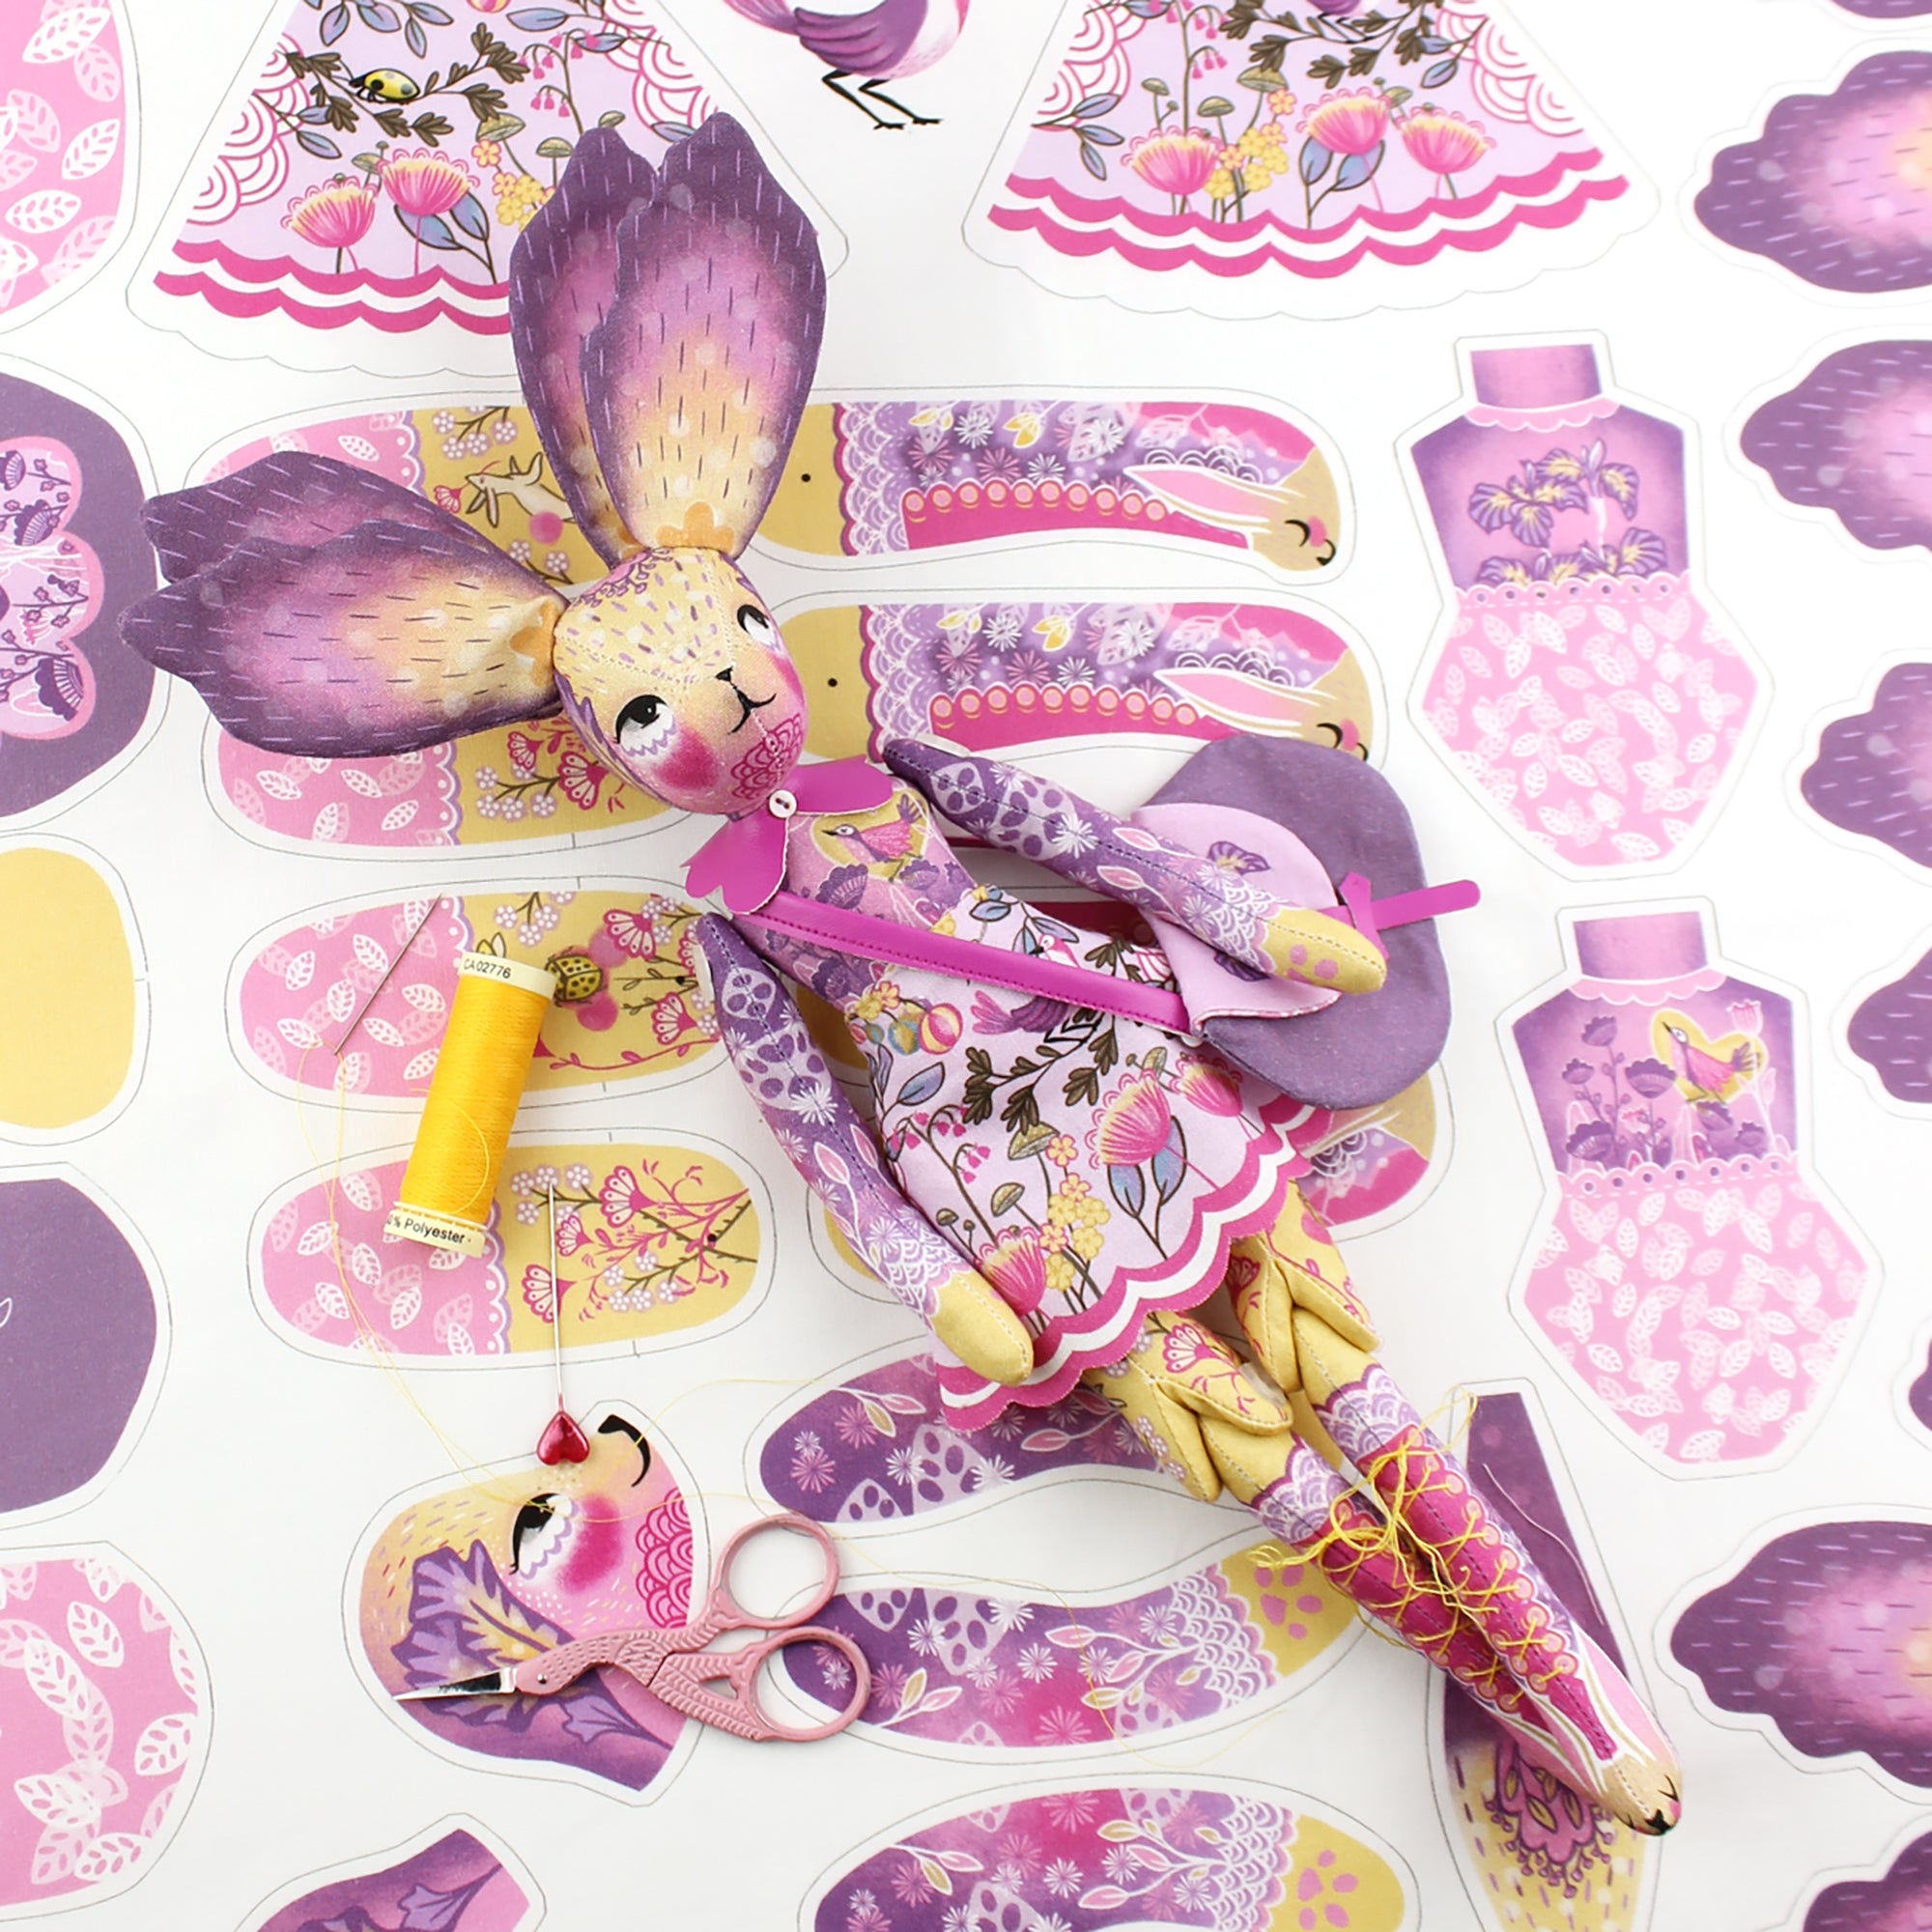 DIY Kit - Iris the Flower Bunny with 12 page Handmade Illustrated Mini Book - FREE UK SHIPPING